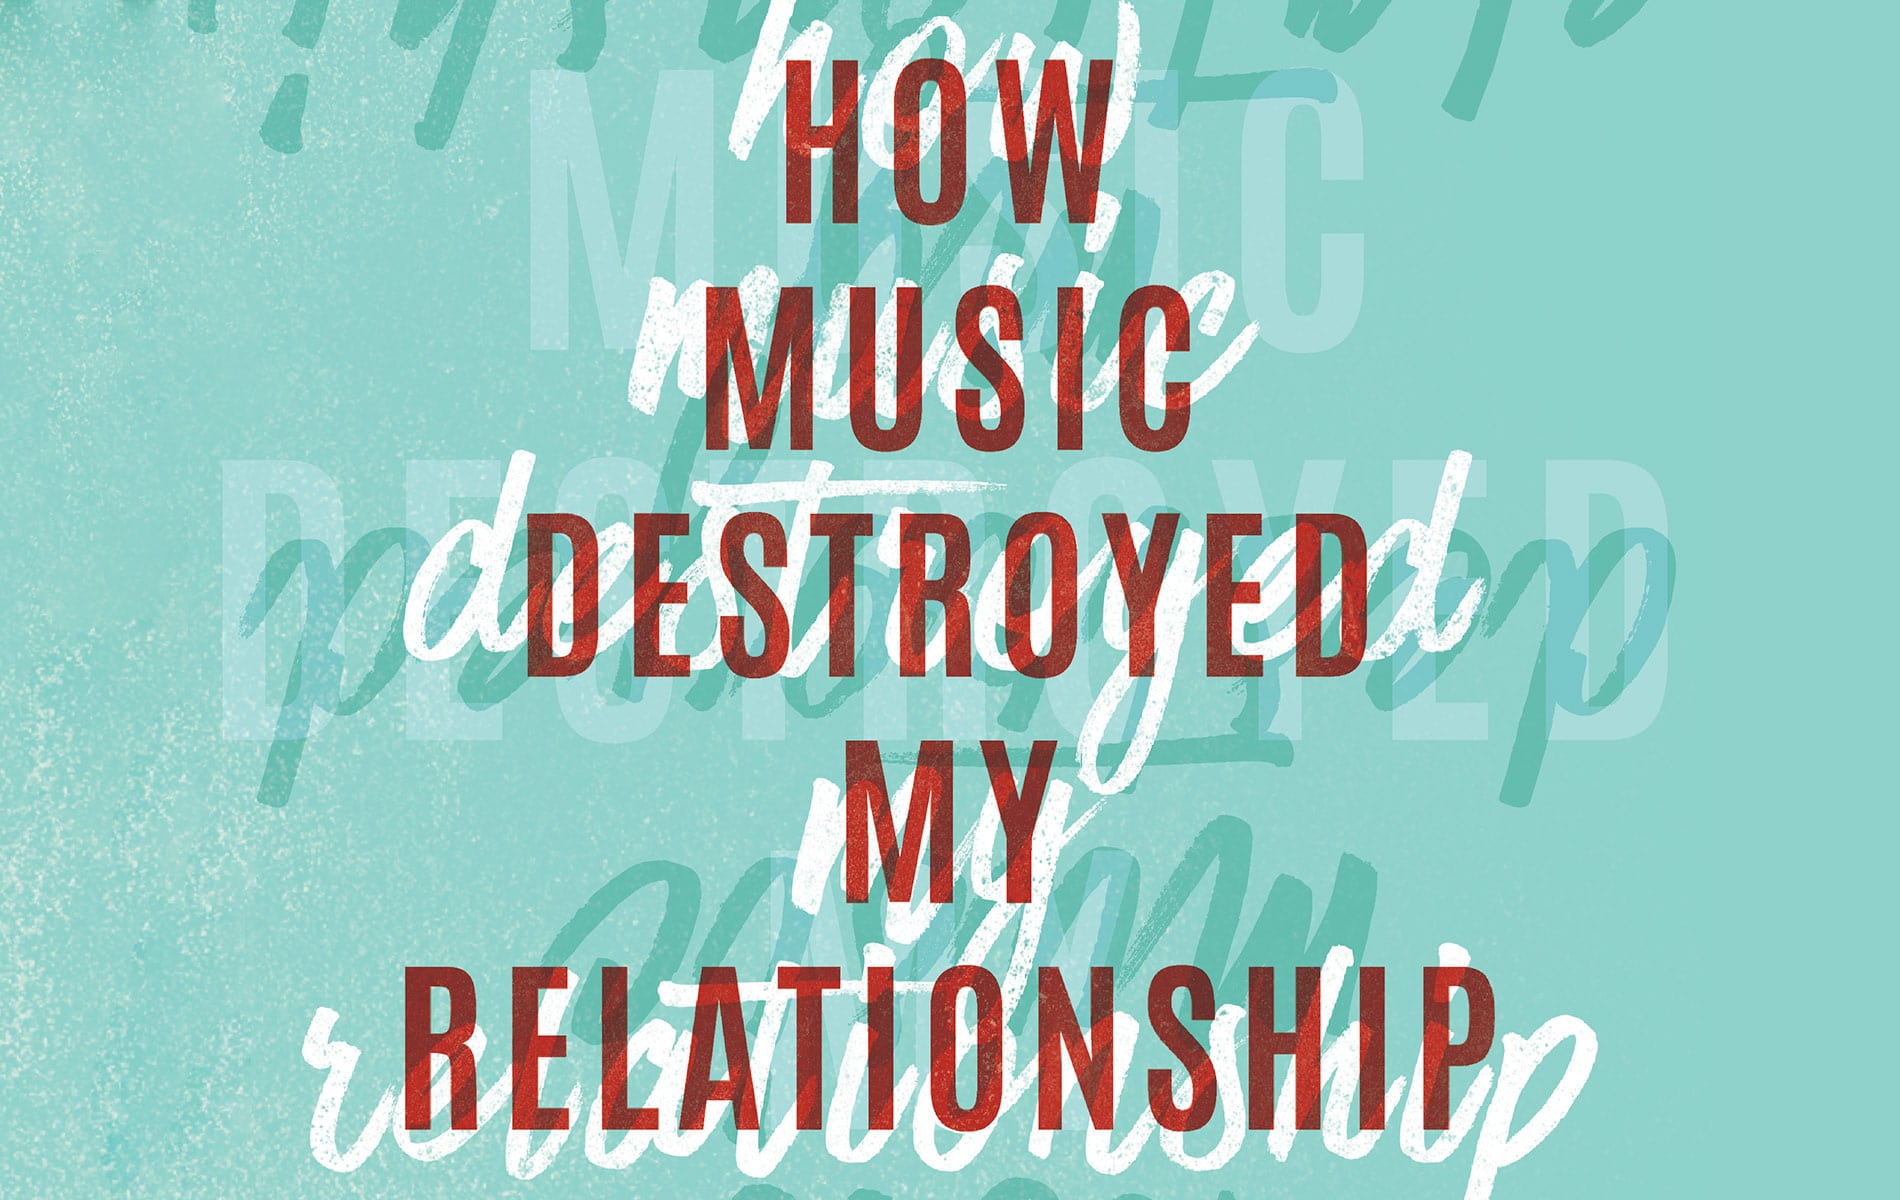 How Music Destroyed My Relationship